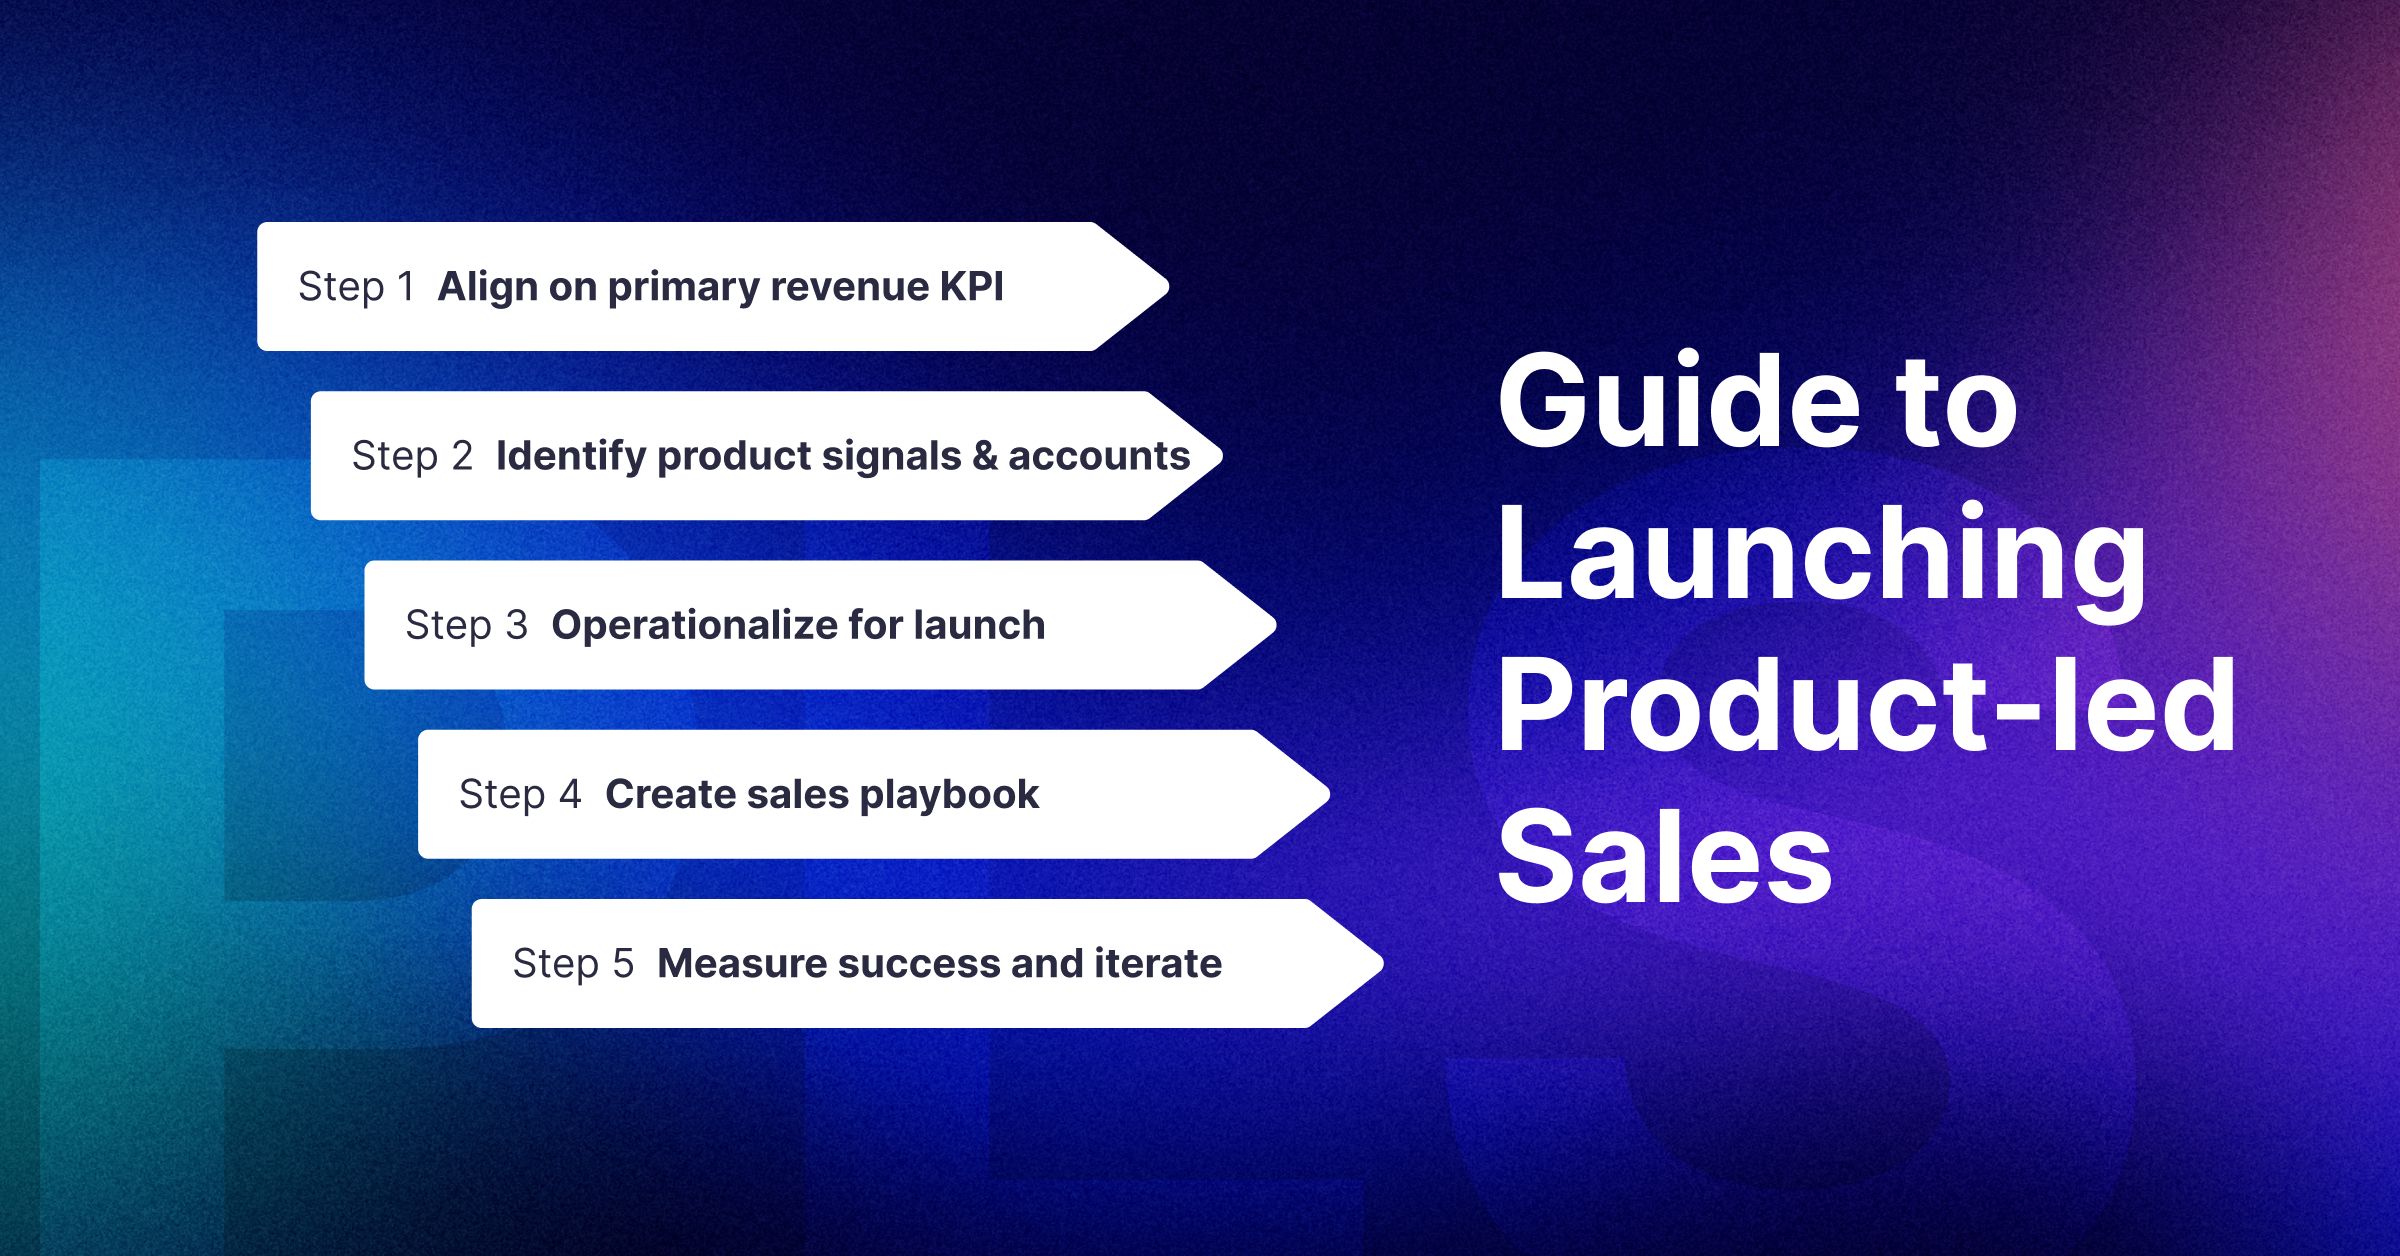 Guide to Launching Product-led Sales main image